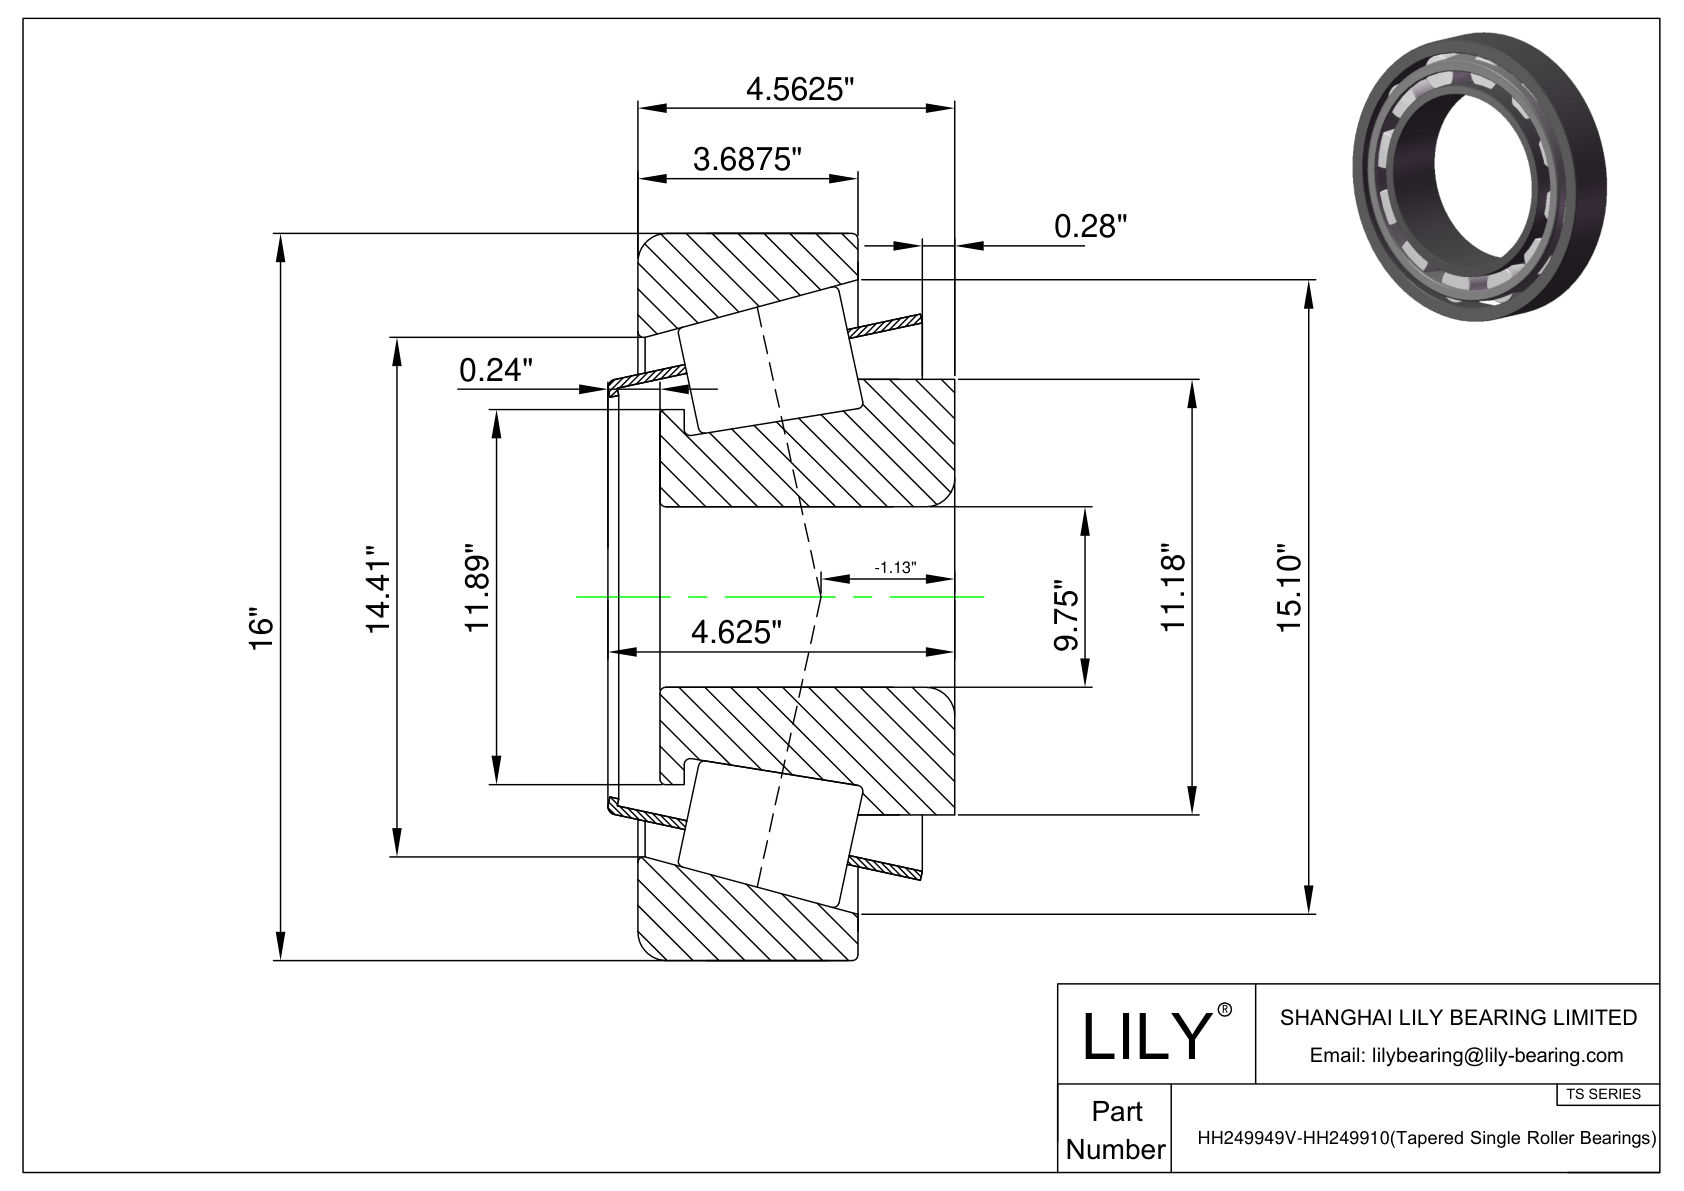 HH249949V-HH249910 TS (Tapered Single Roller Bearings) (Imperial) cad drawing